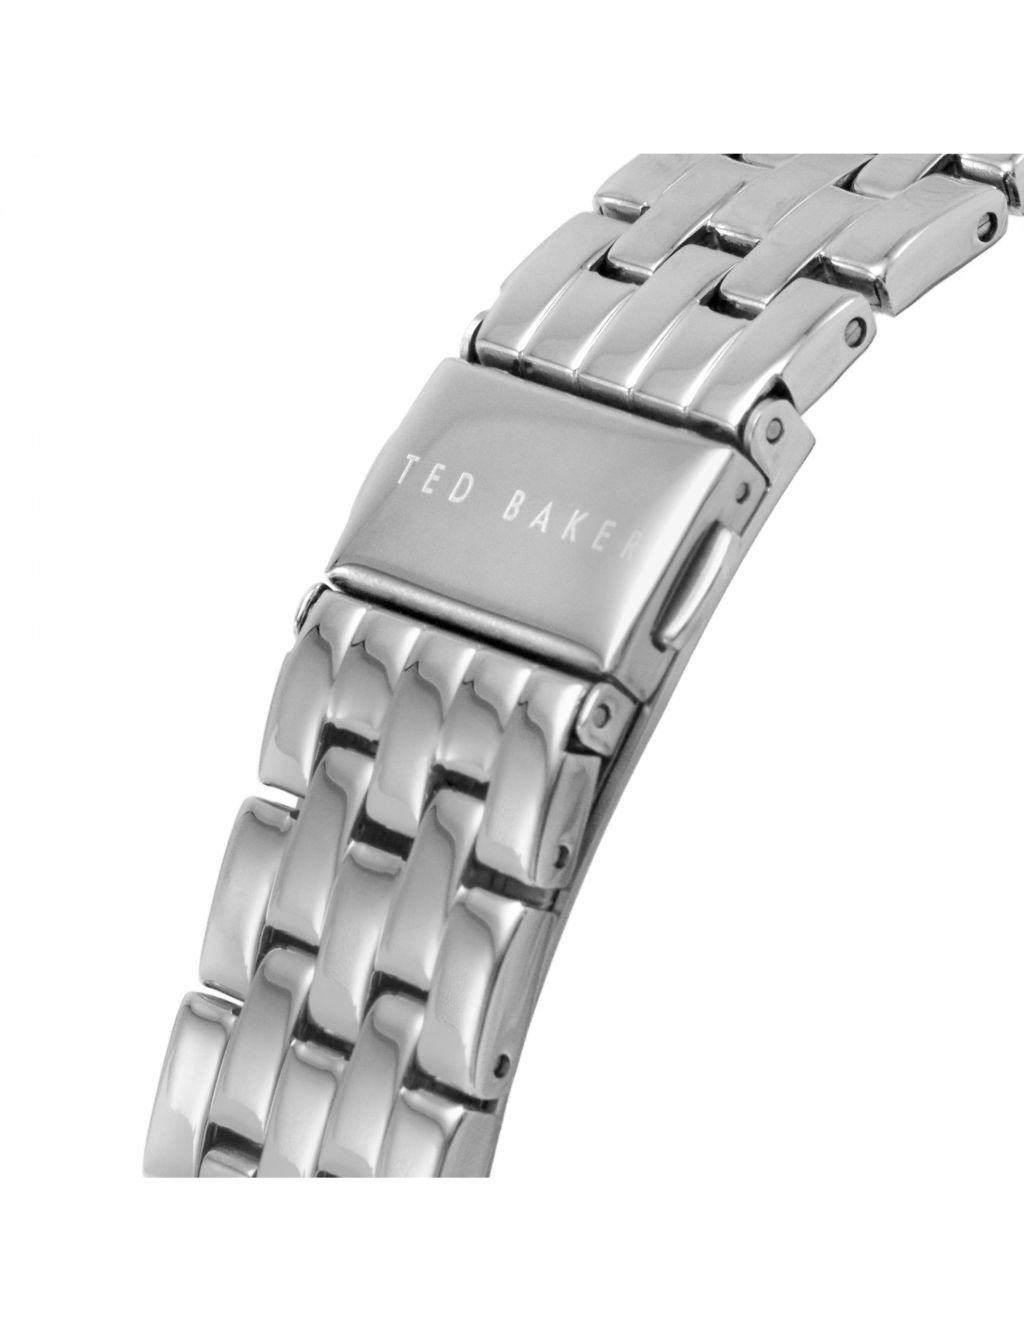 Ted Baker Phylipa Stainless Steel Watch image 5